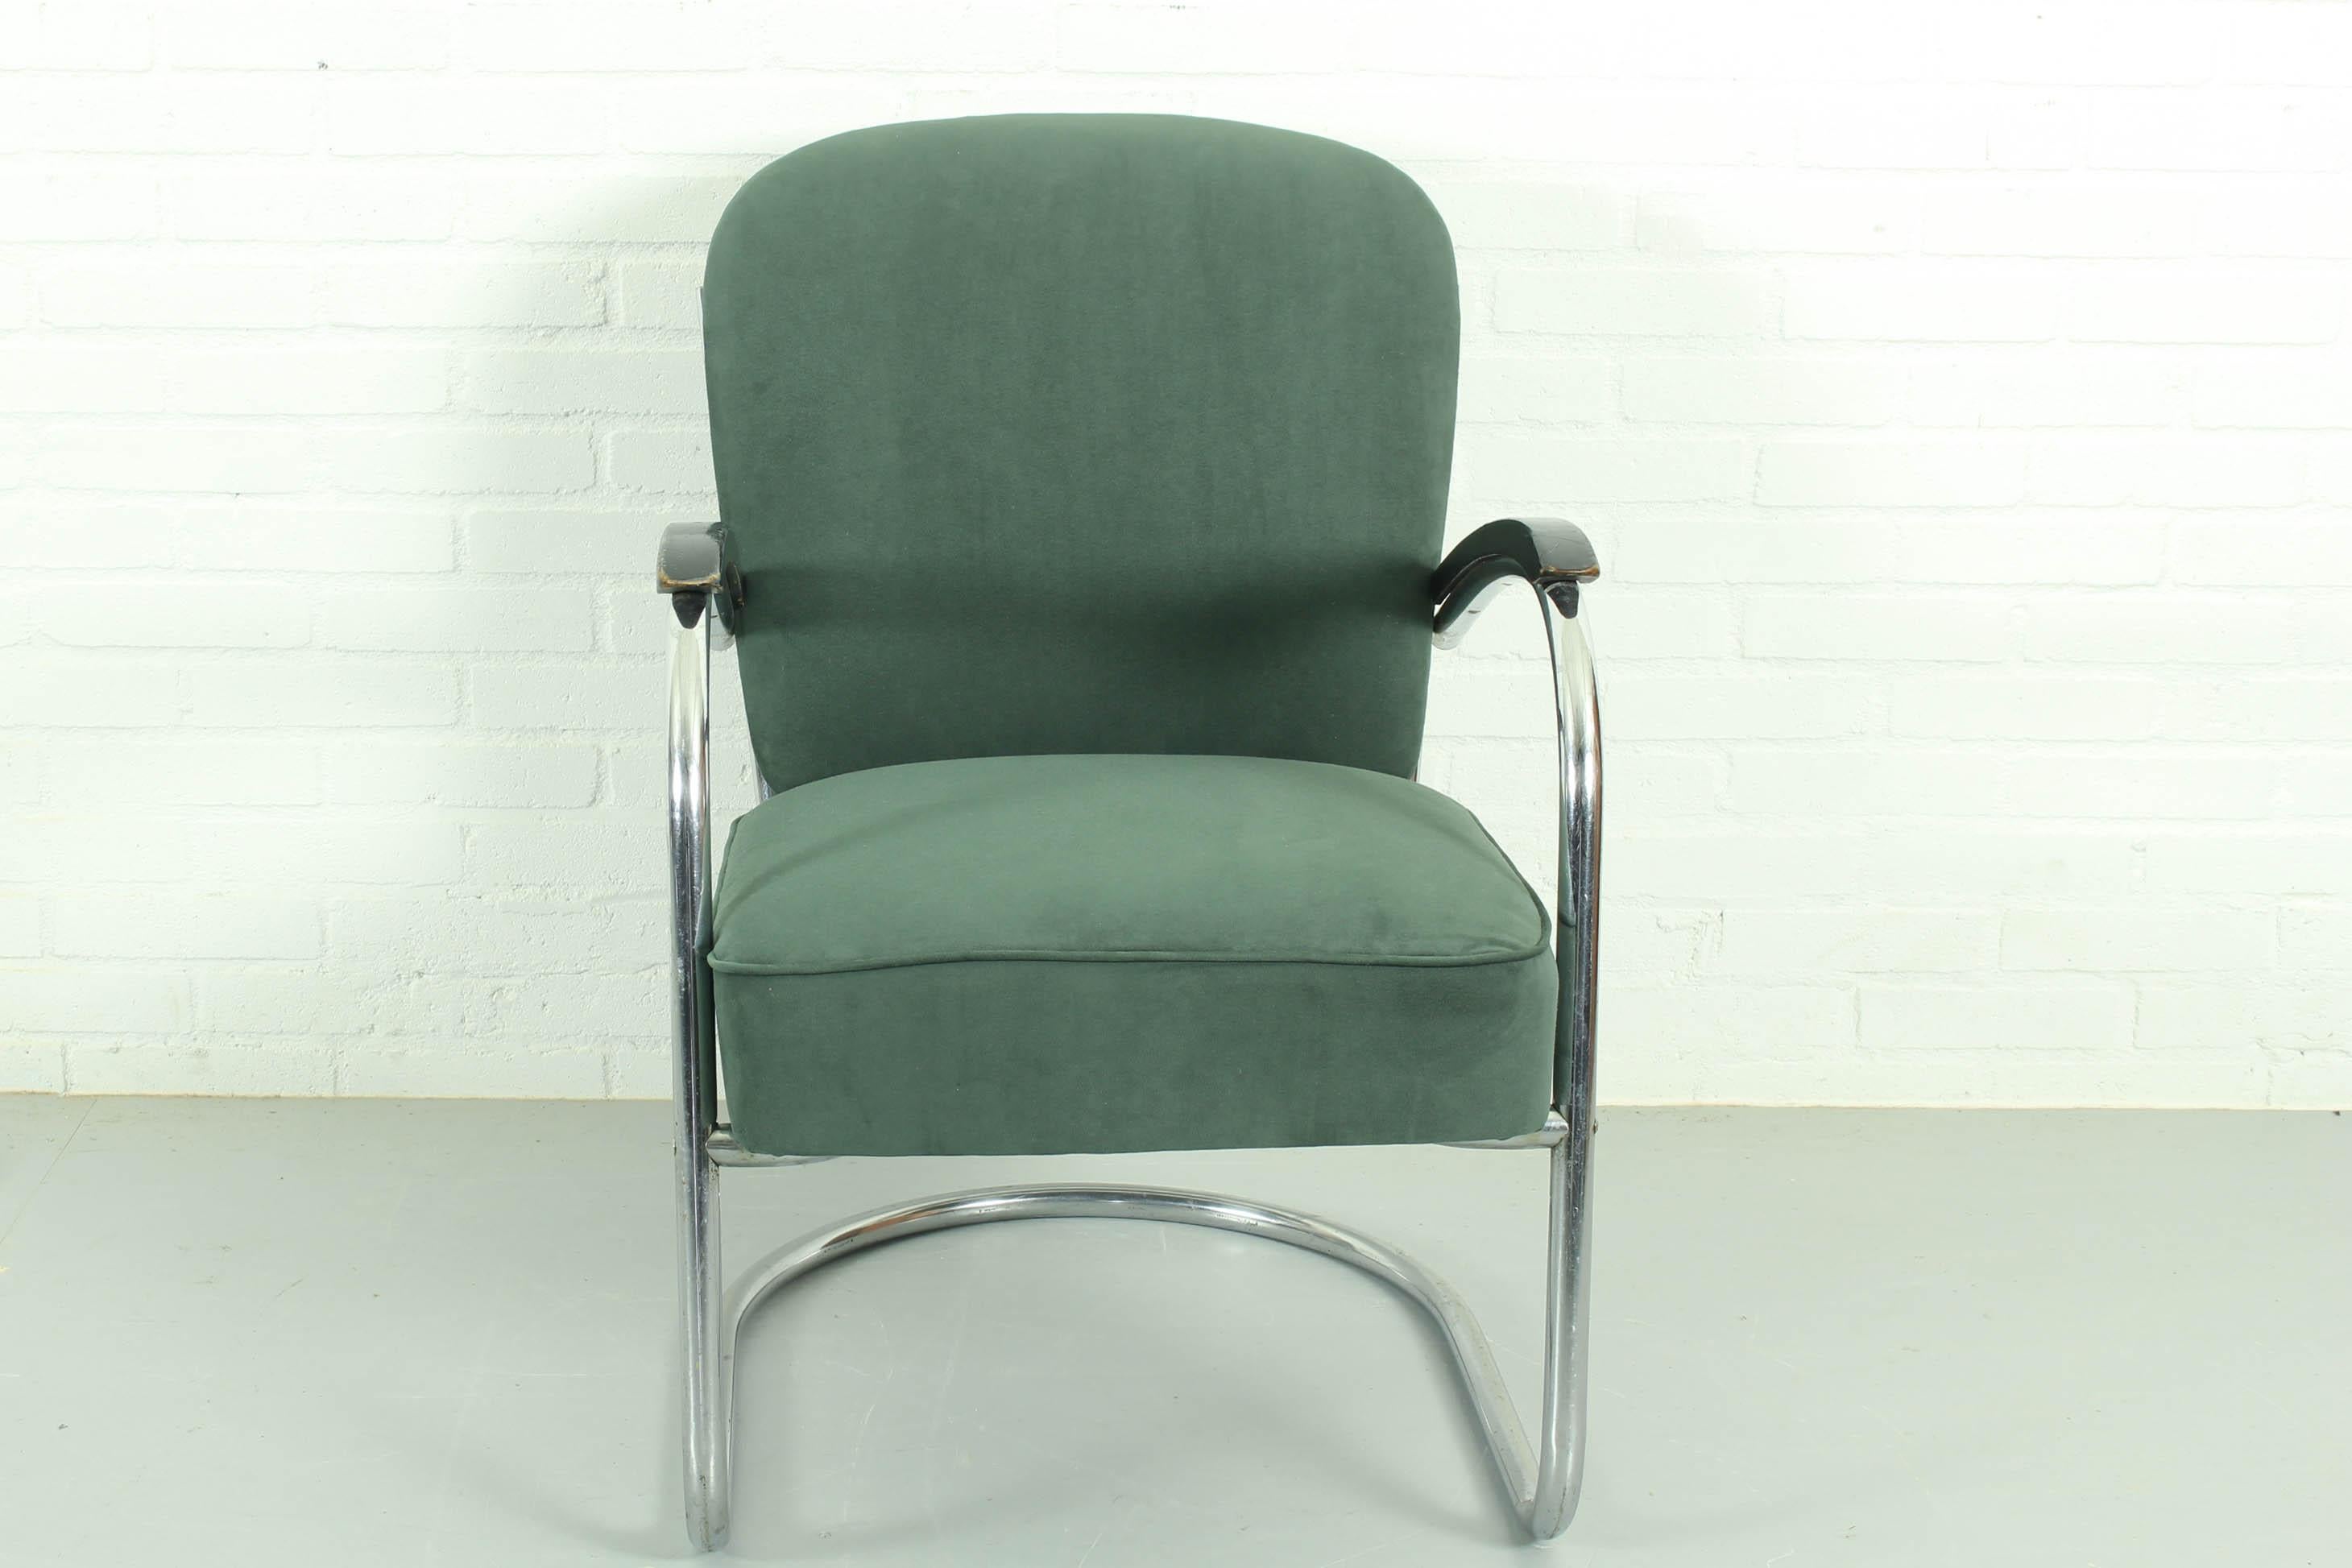 Mid-Century Modern Model 436 Lounge Chair by Paul Schuitema For D3, 1930s For Sale